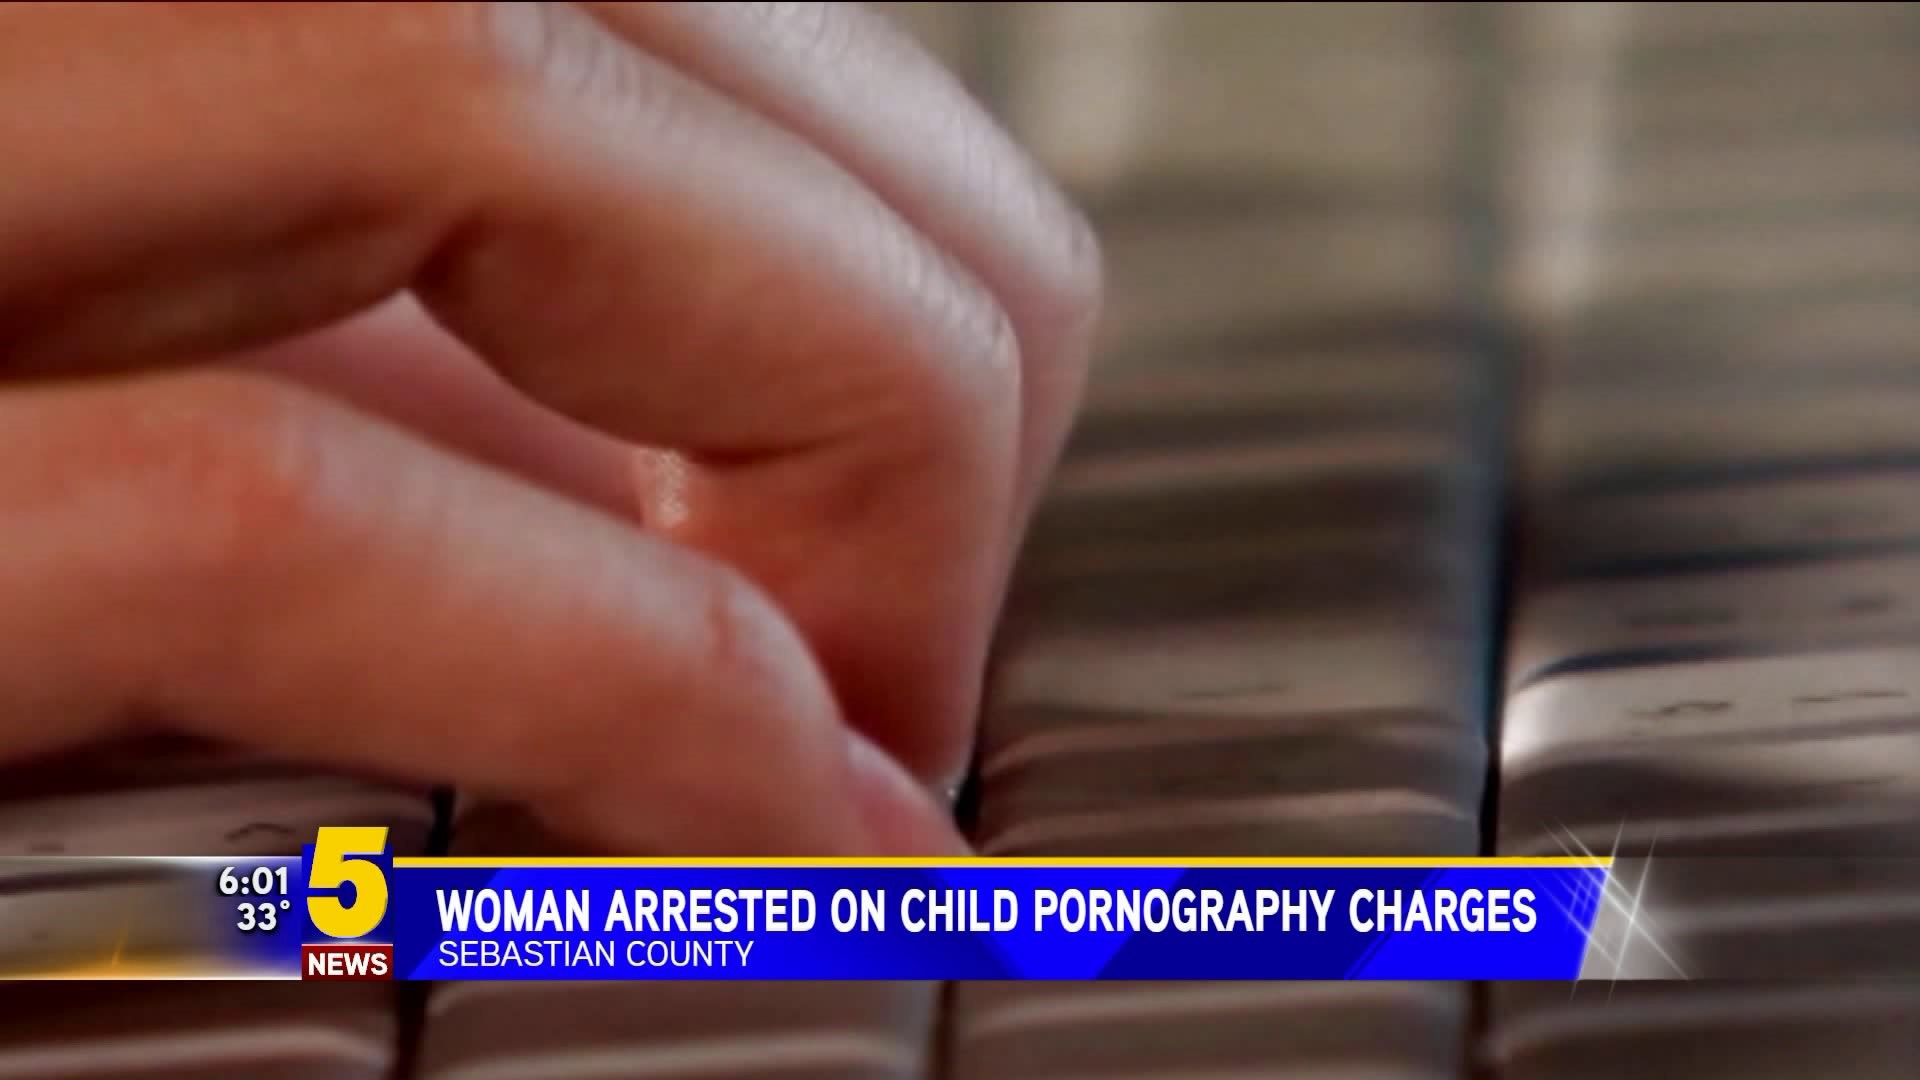 Sebastian County Woman Arrested On Charges Of Child Pornography